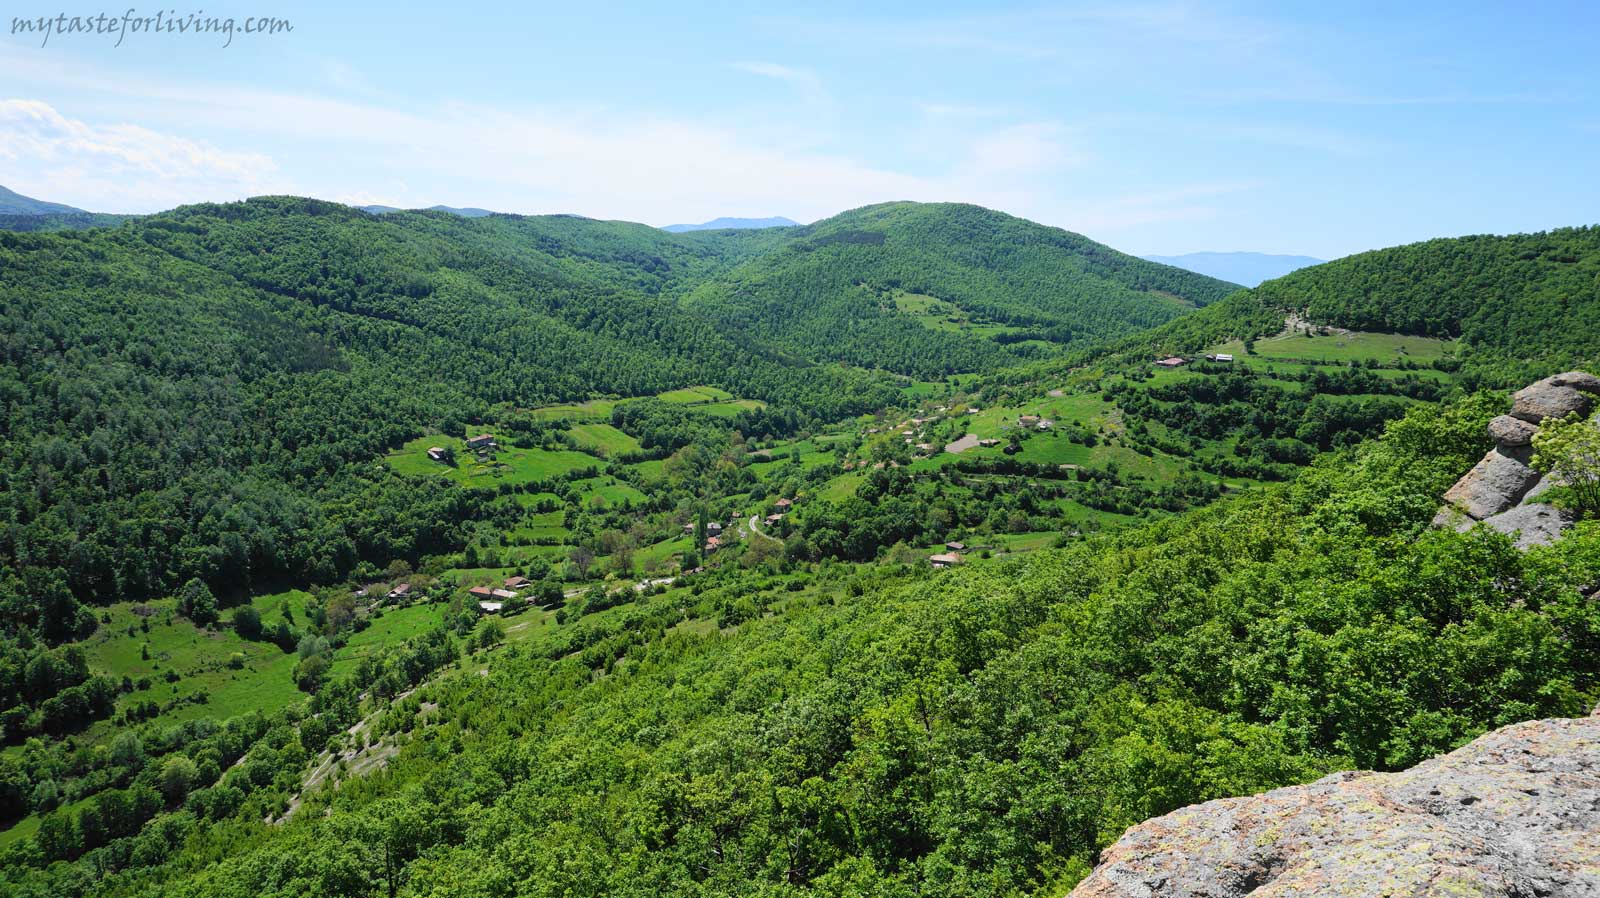 The thracian rock sanctuaries with mysterious trapezoidal rock niches carved in them are typical of the Eastern Rhodopes. The forests above the village of Nochevo are full of similar niches and small caves (like Kodja yin) and sharapani.